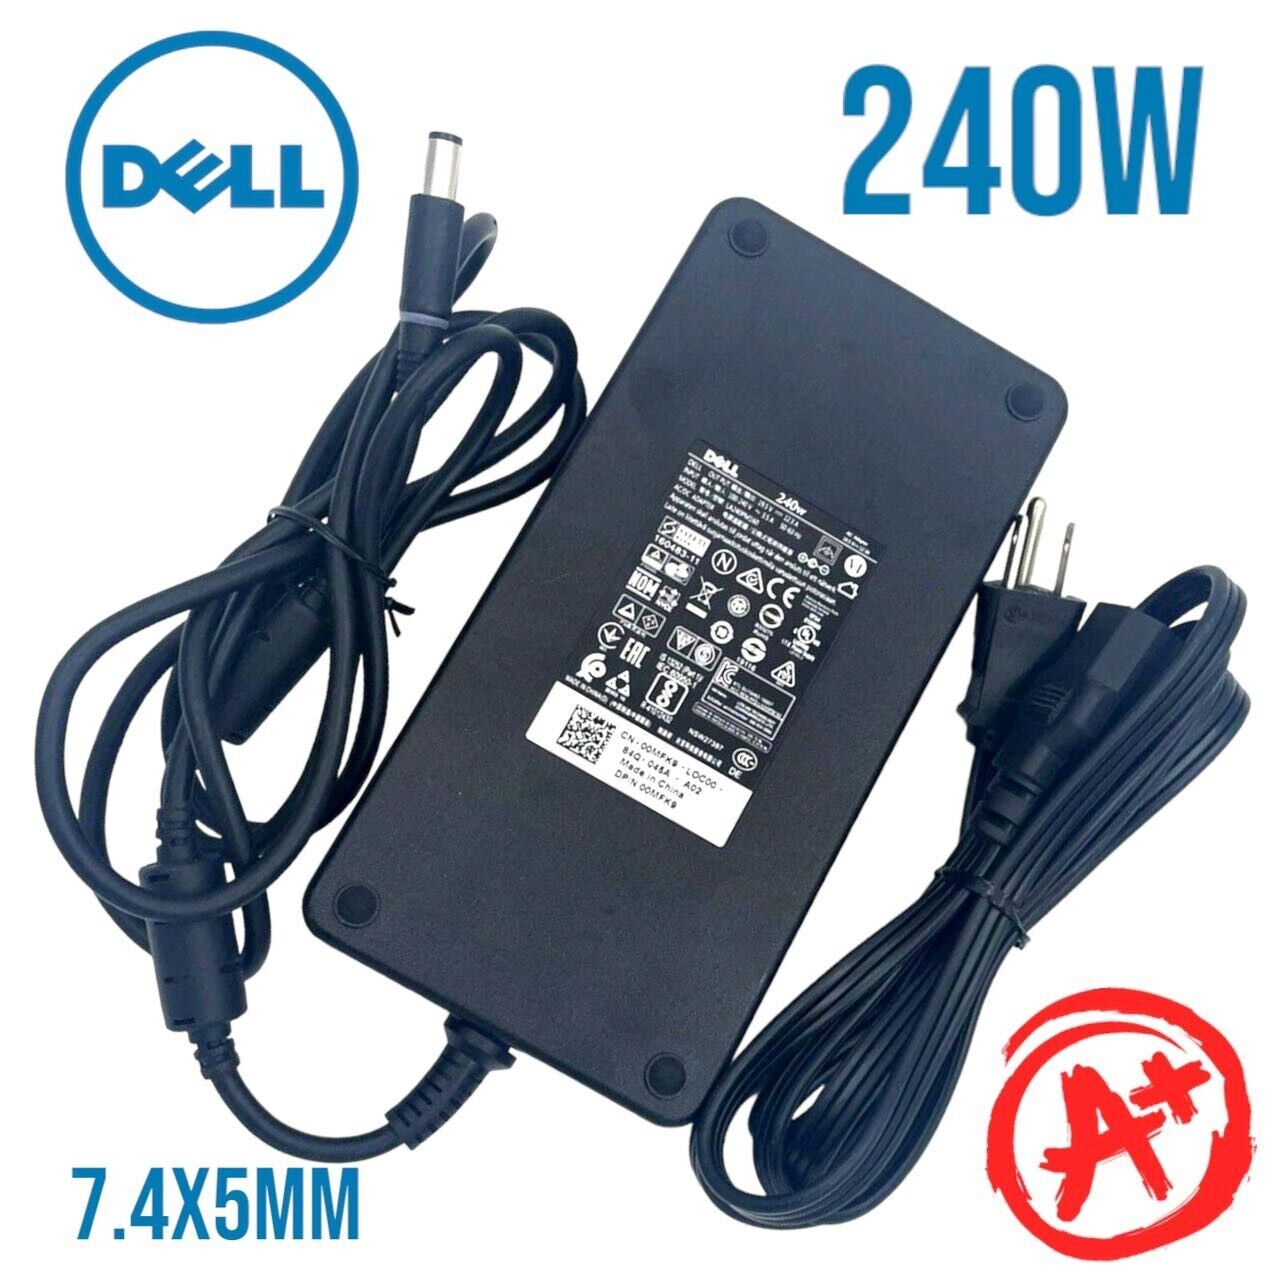 Genuine Dell Laptop Charger 19.5v 240w AC Adapter Power Supply DA240PM190